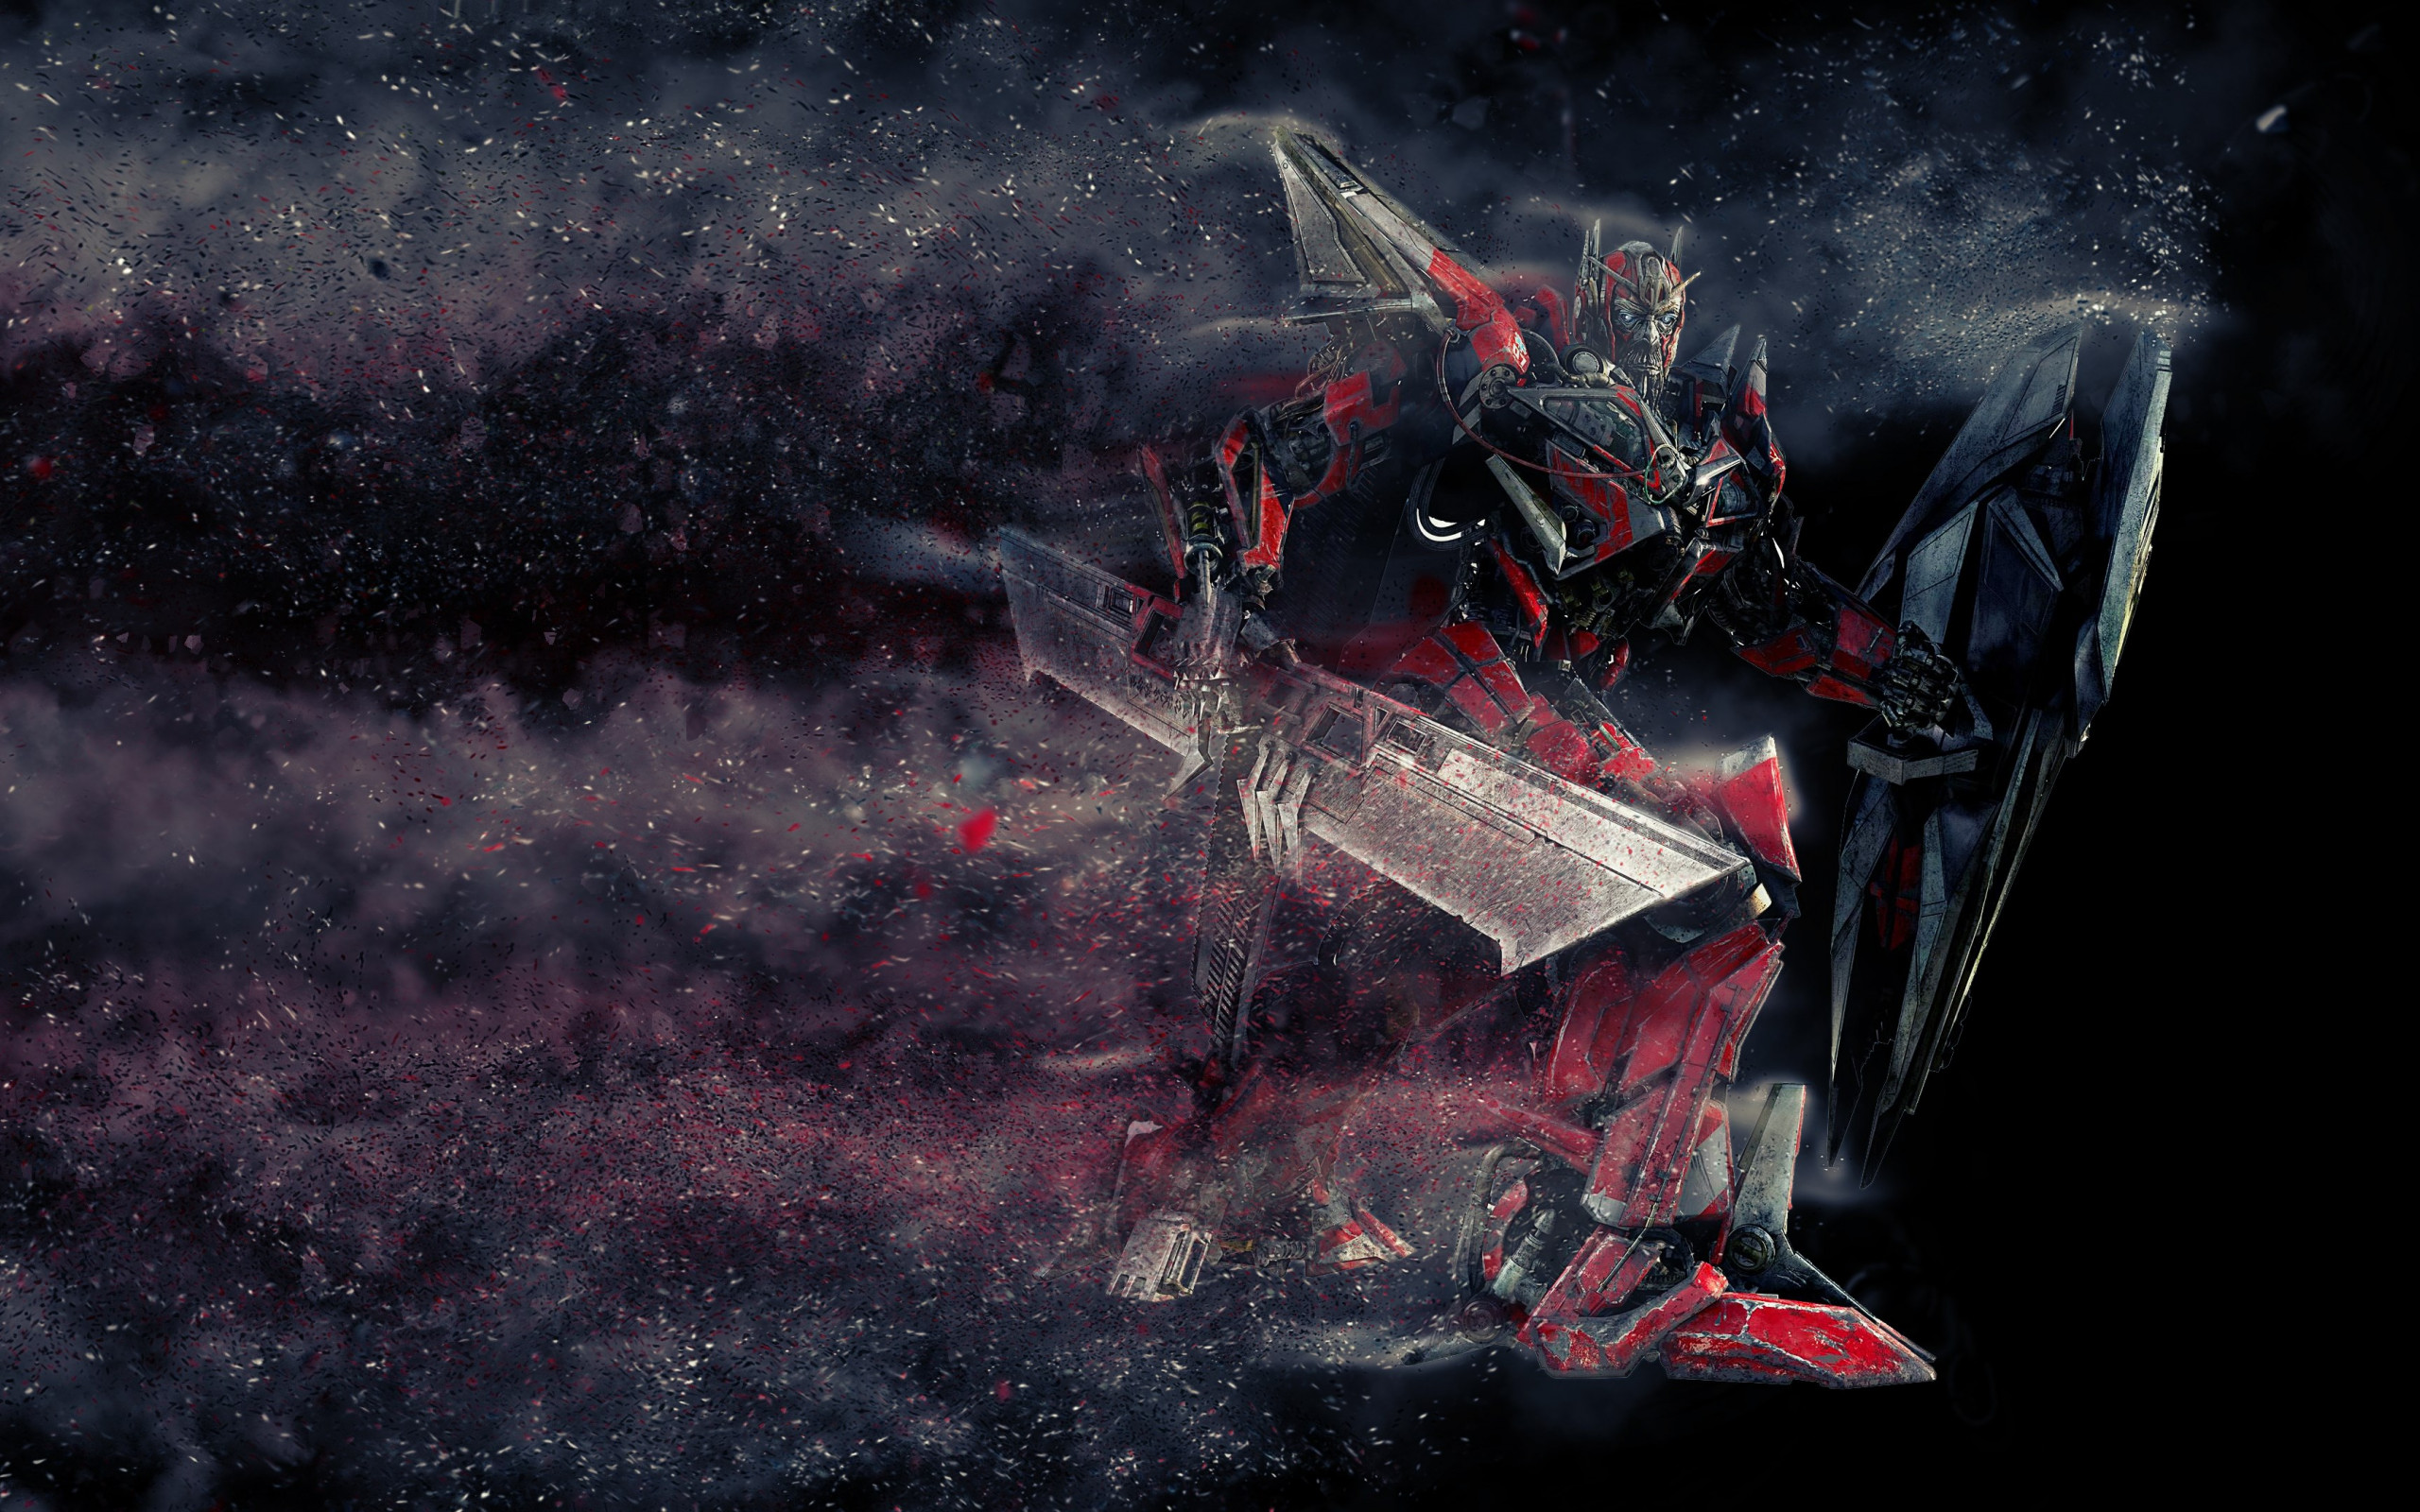 Sentinel Prime from Transformers wallpaper 2560x1600